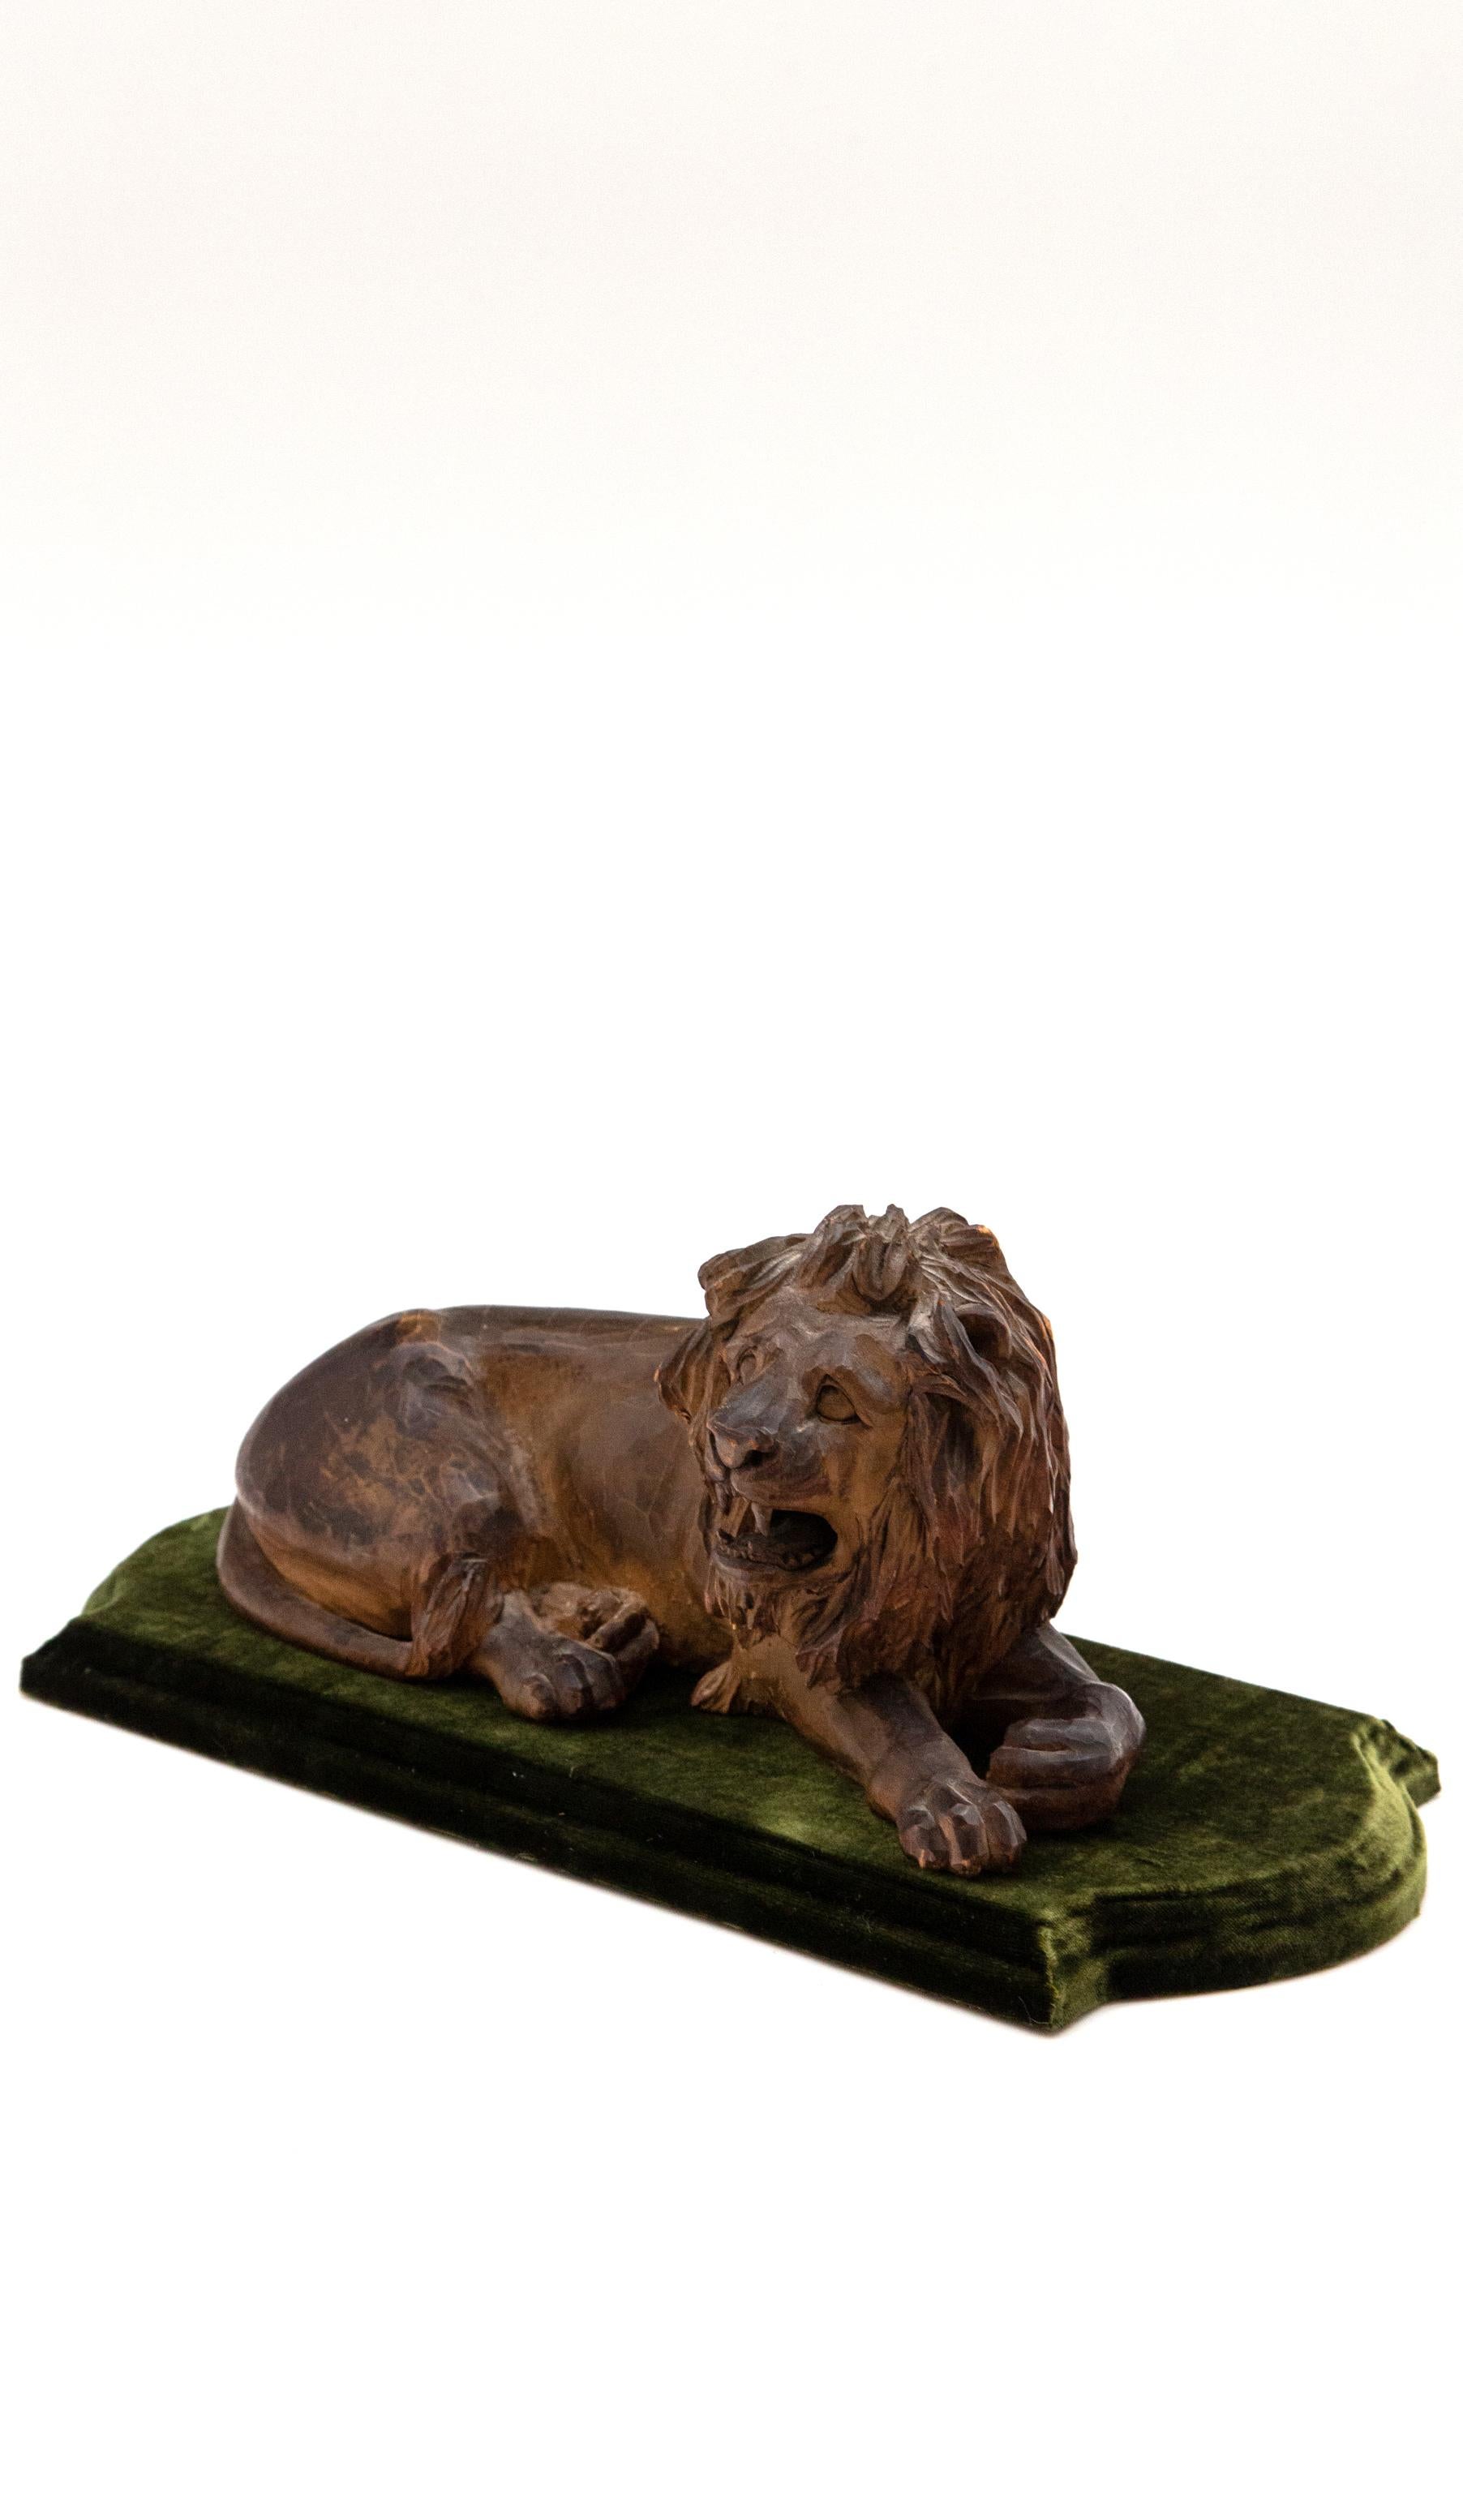 19th century carved wooden reclining lion on a green velvet base. Beautifully detailed hand carved lion resting on olive-green velvet-covered base. Measures: 14